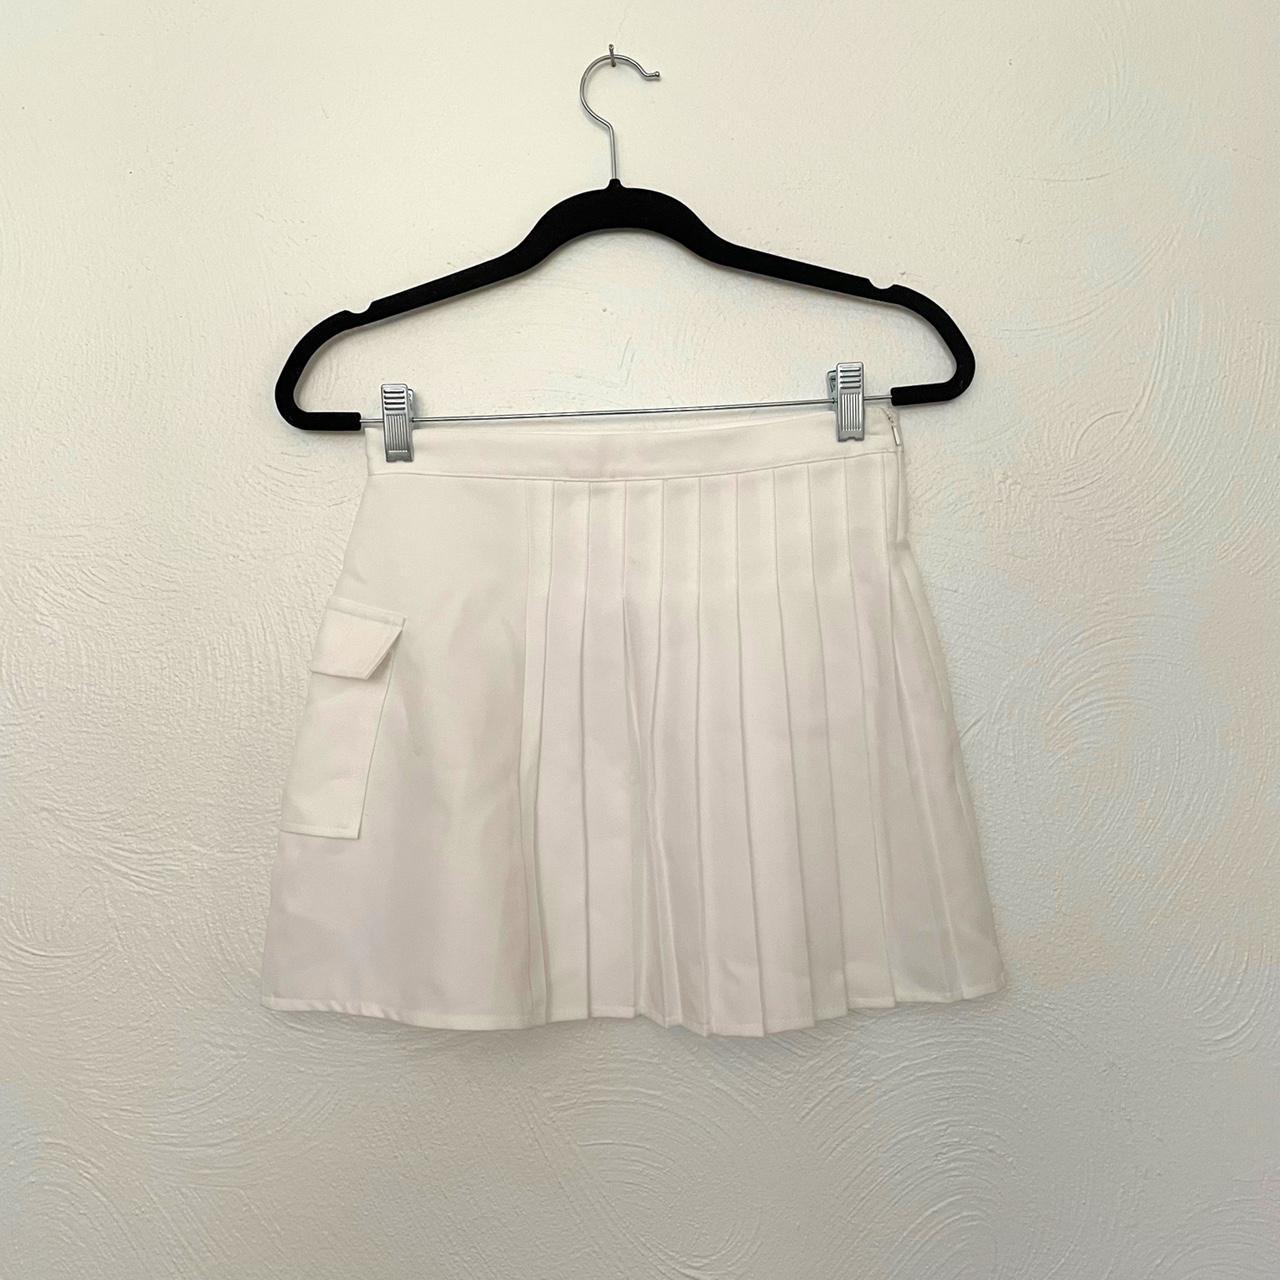 Product Image 3 - Urban Outfitters tennis skirt!

pleated with